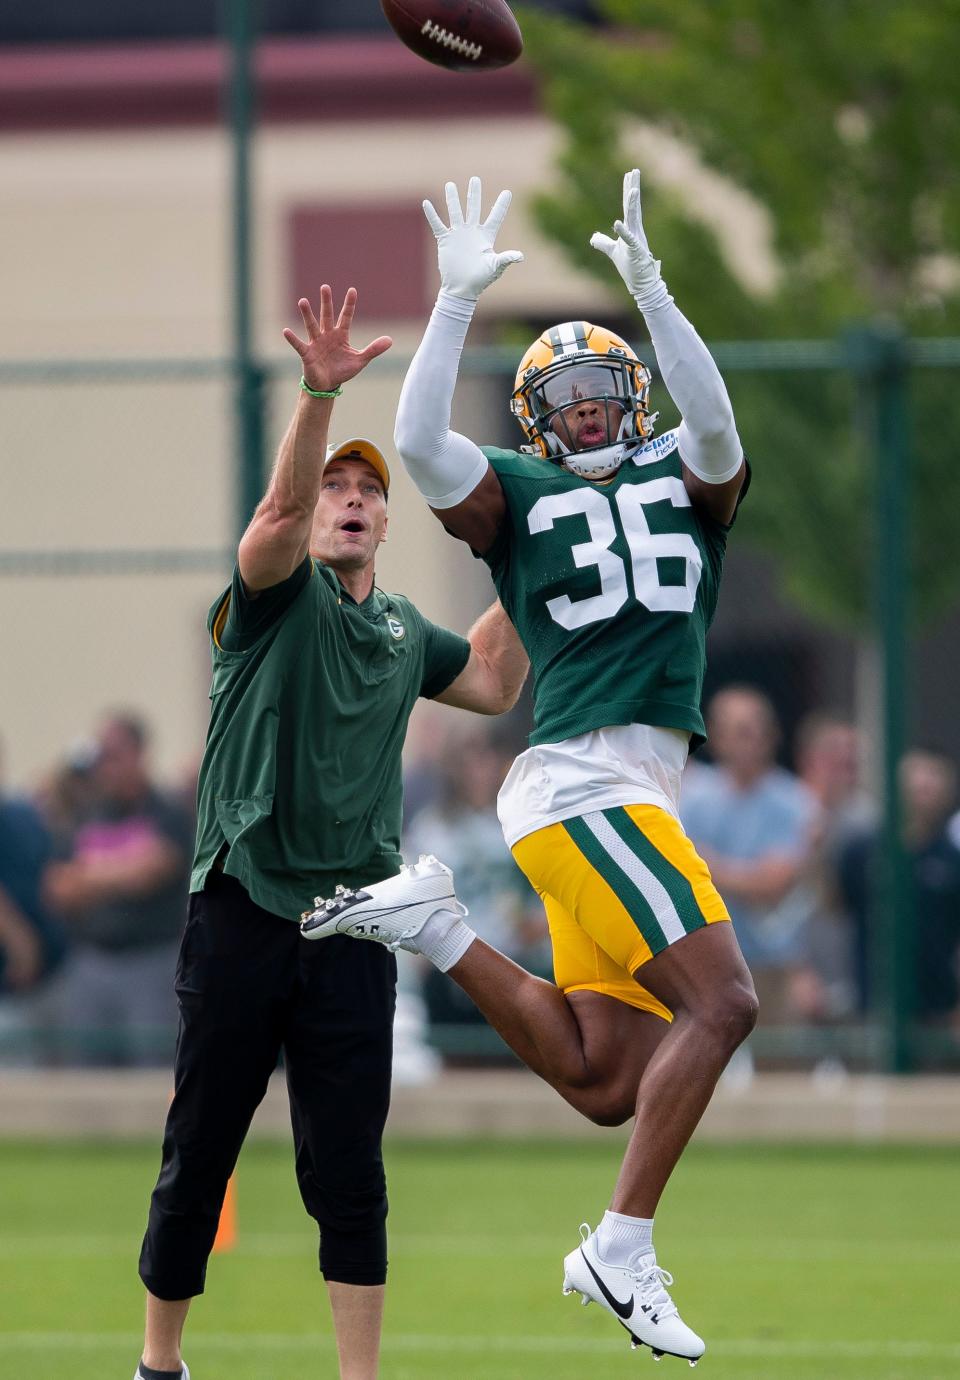 Green Bay Packers safety Anthony Johnson Jr. (36) intercepts a pass in a takeaway drill during practice on Tuesday, August 1, 2023, at Ray Nitschke Field in Green Bay, Wis. Tork Mason/USA TODAY NETWORK-Wisconsin